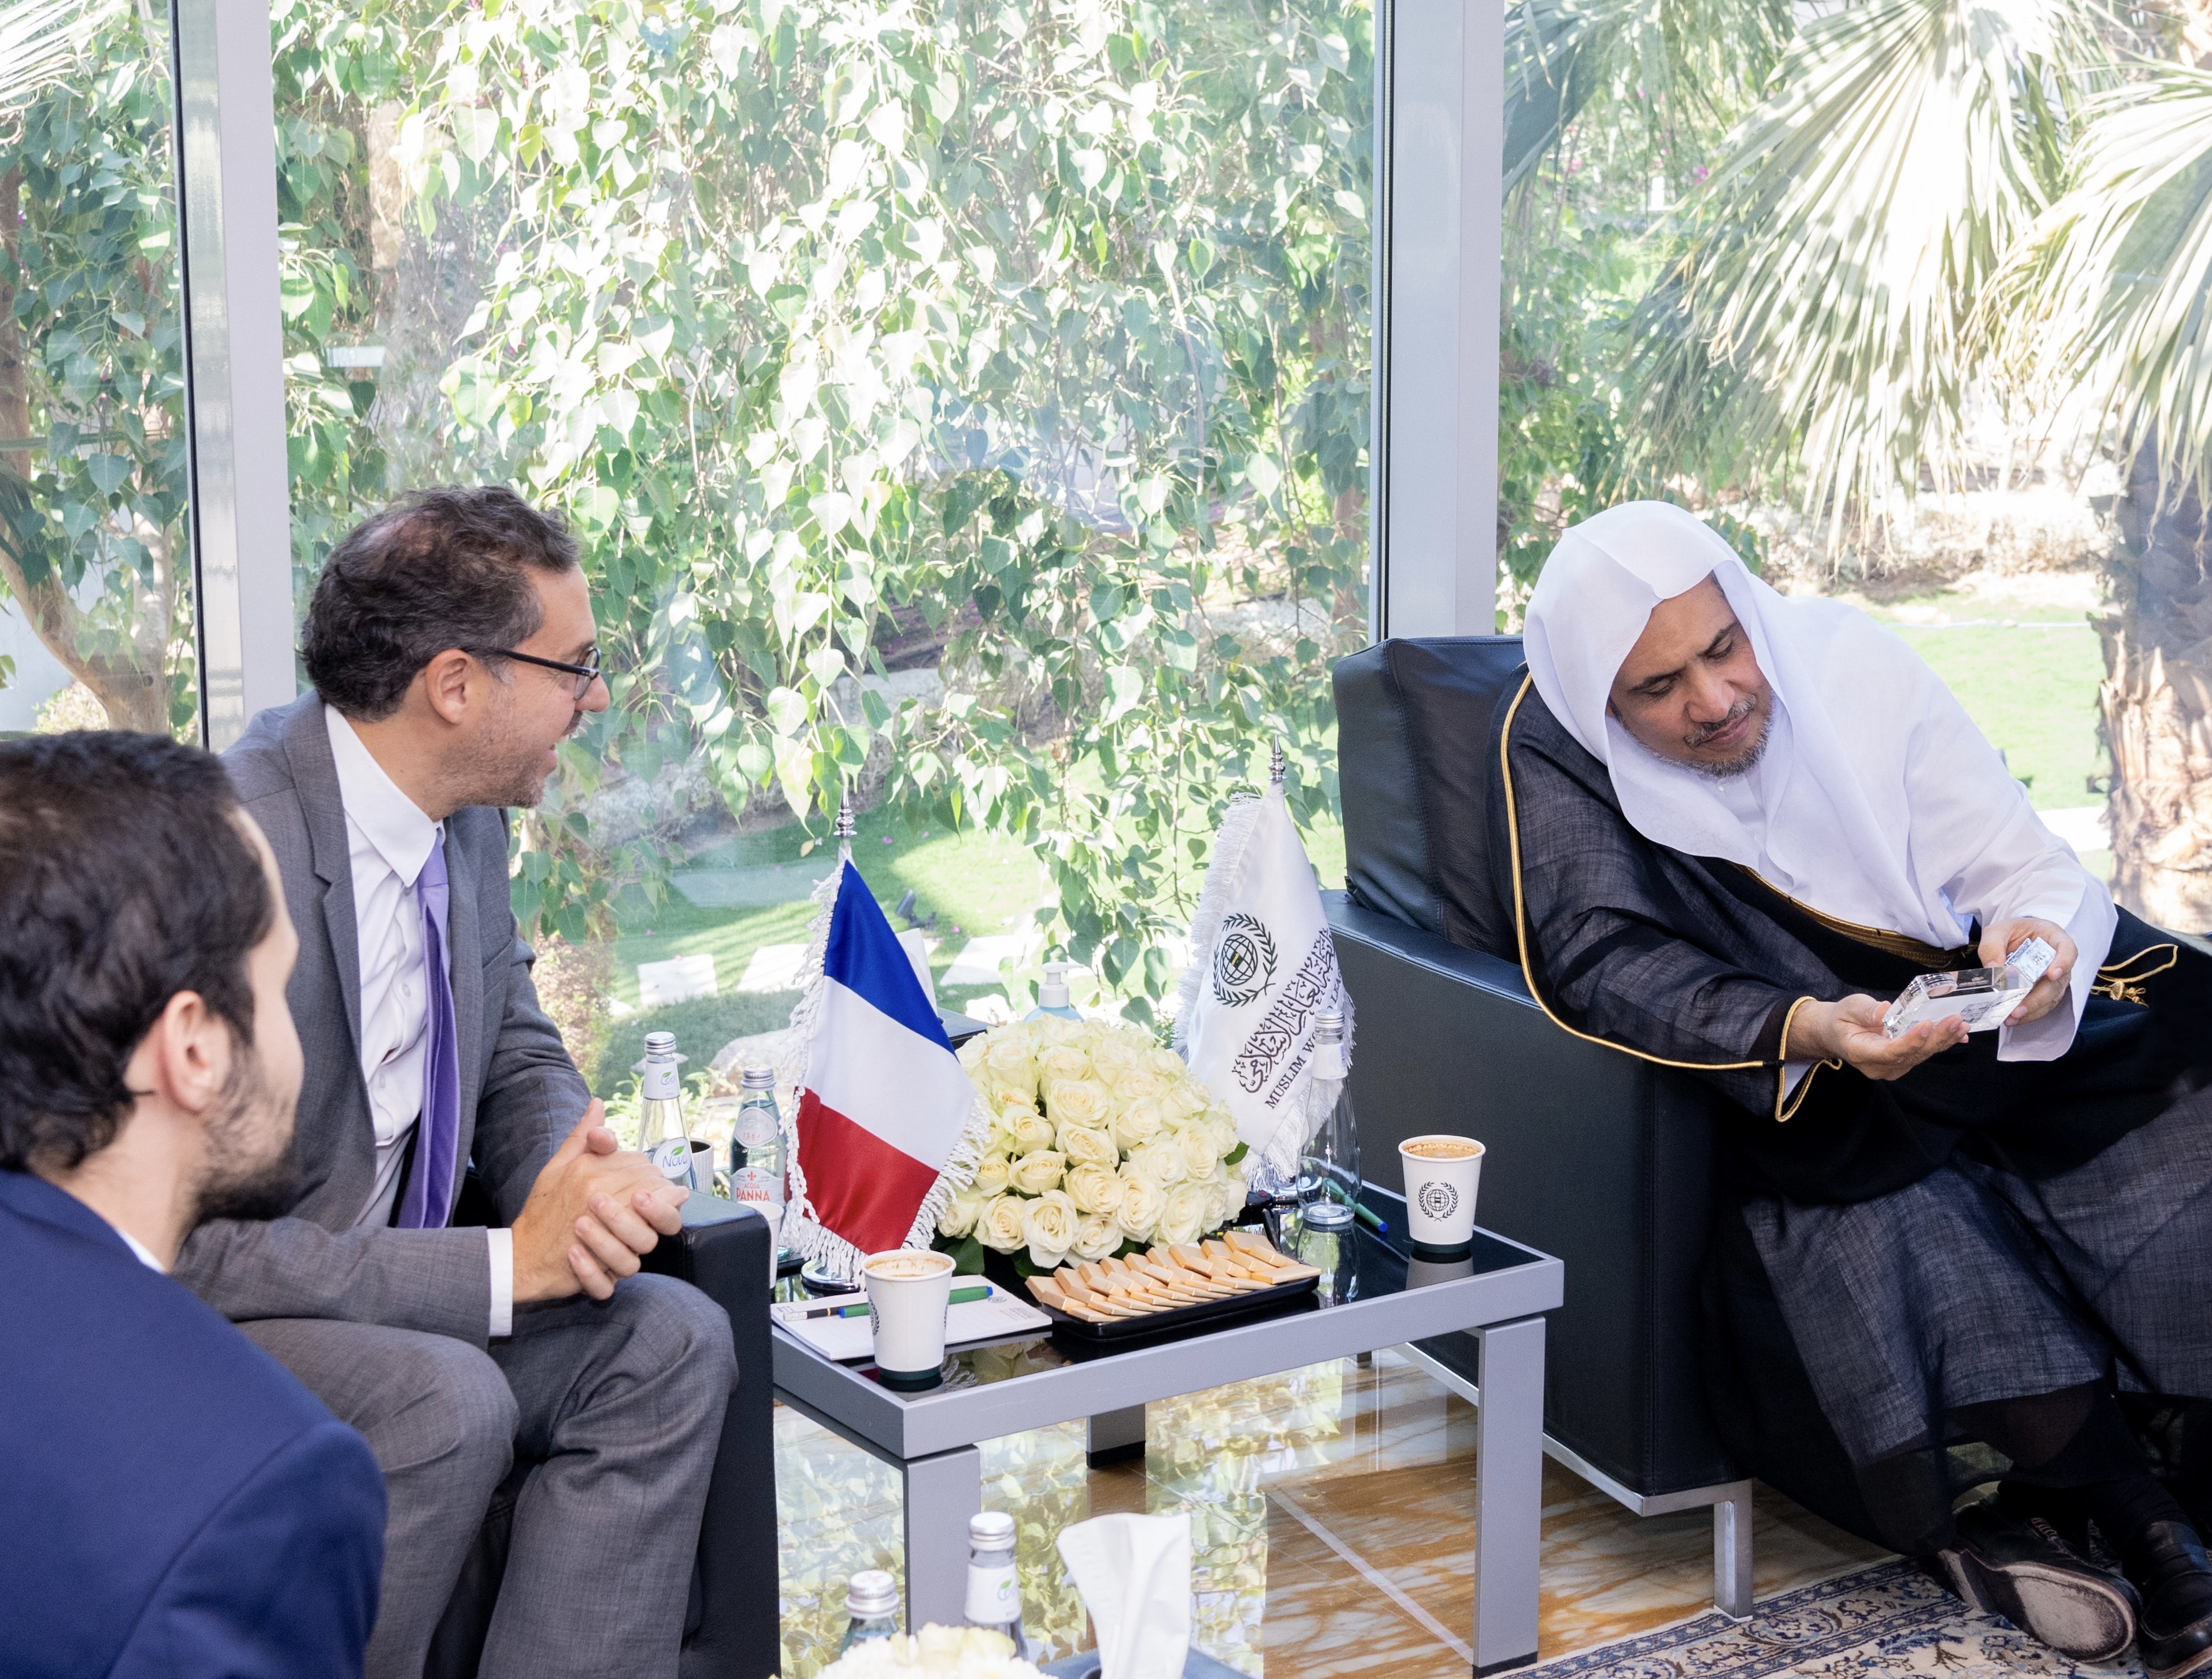 His Excellency Dr. Mohammad Alissa met with the Ambassador of France for the Mediterranean region